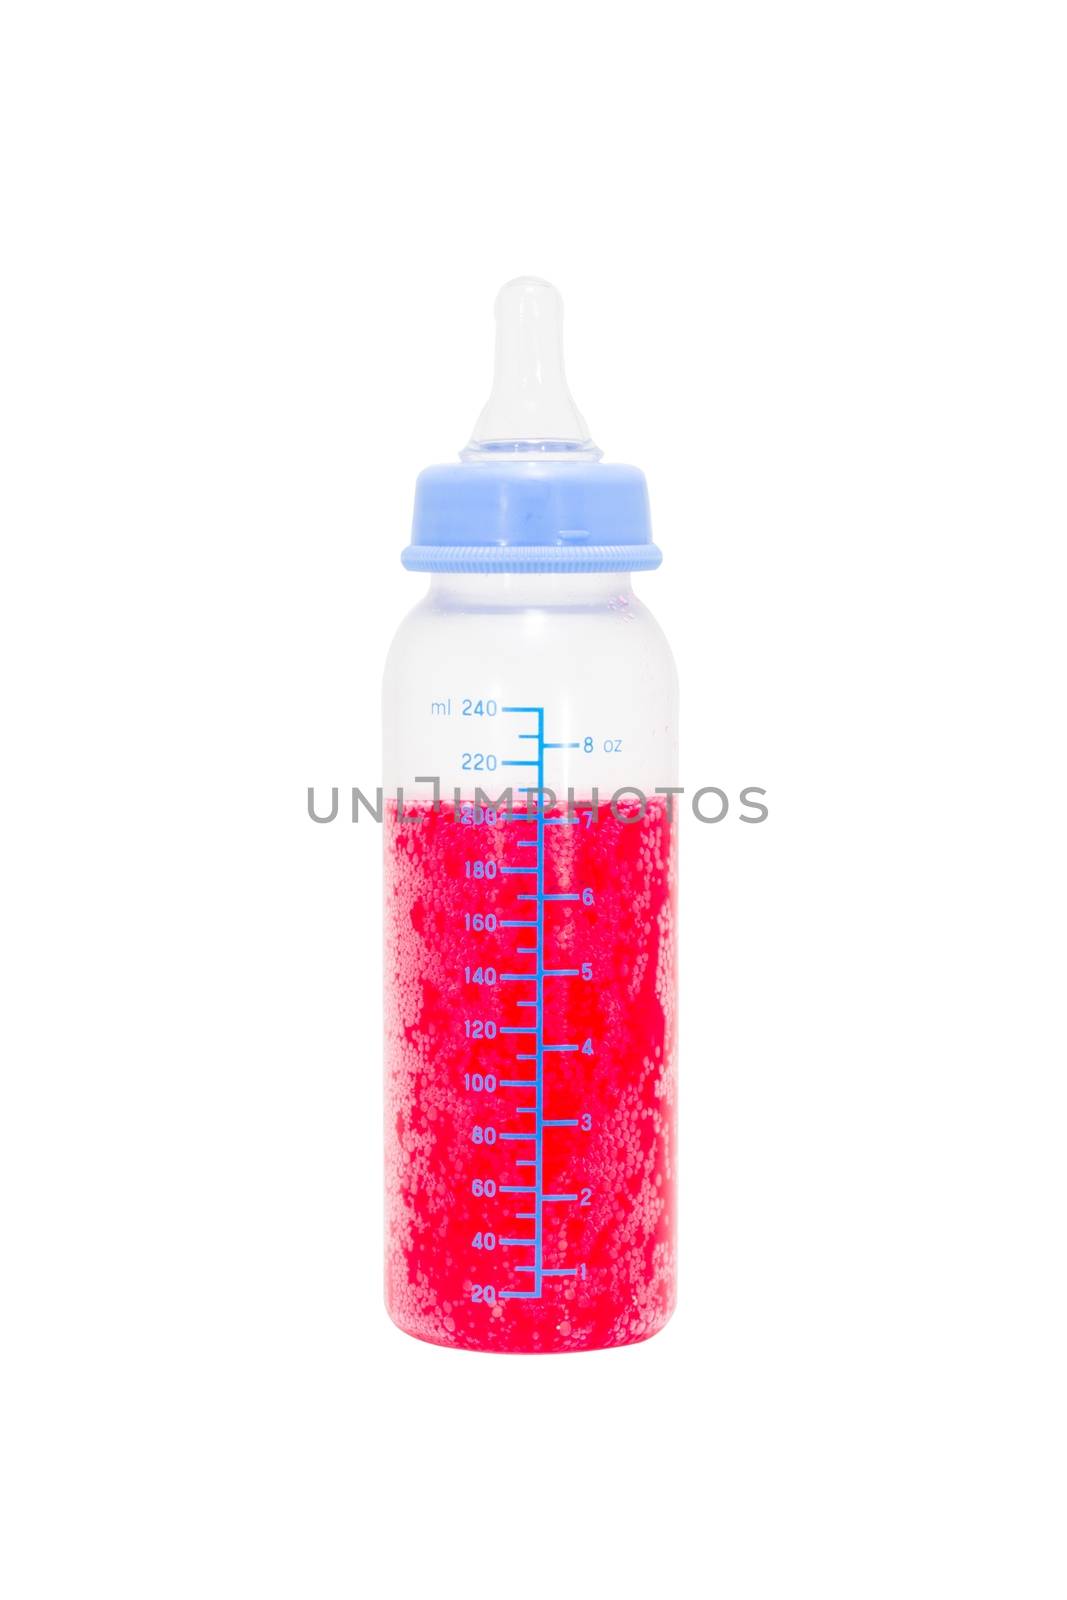 baby milk bottle with red soda inside isolated on white background.